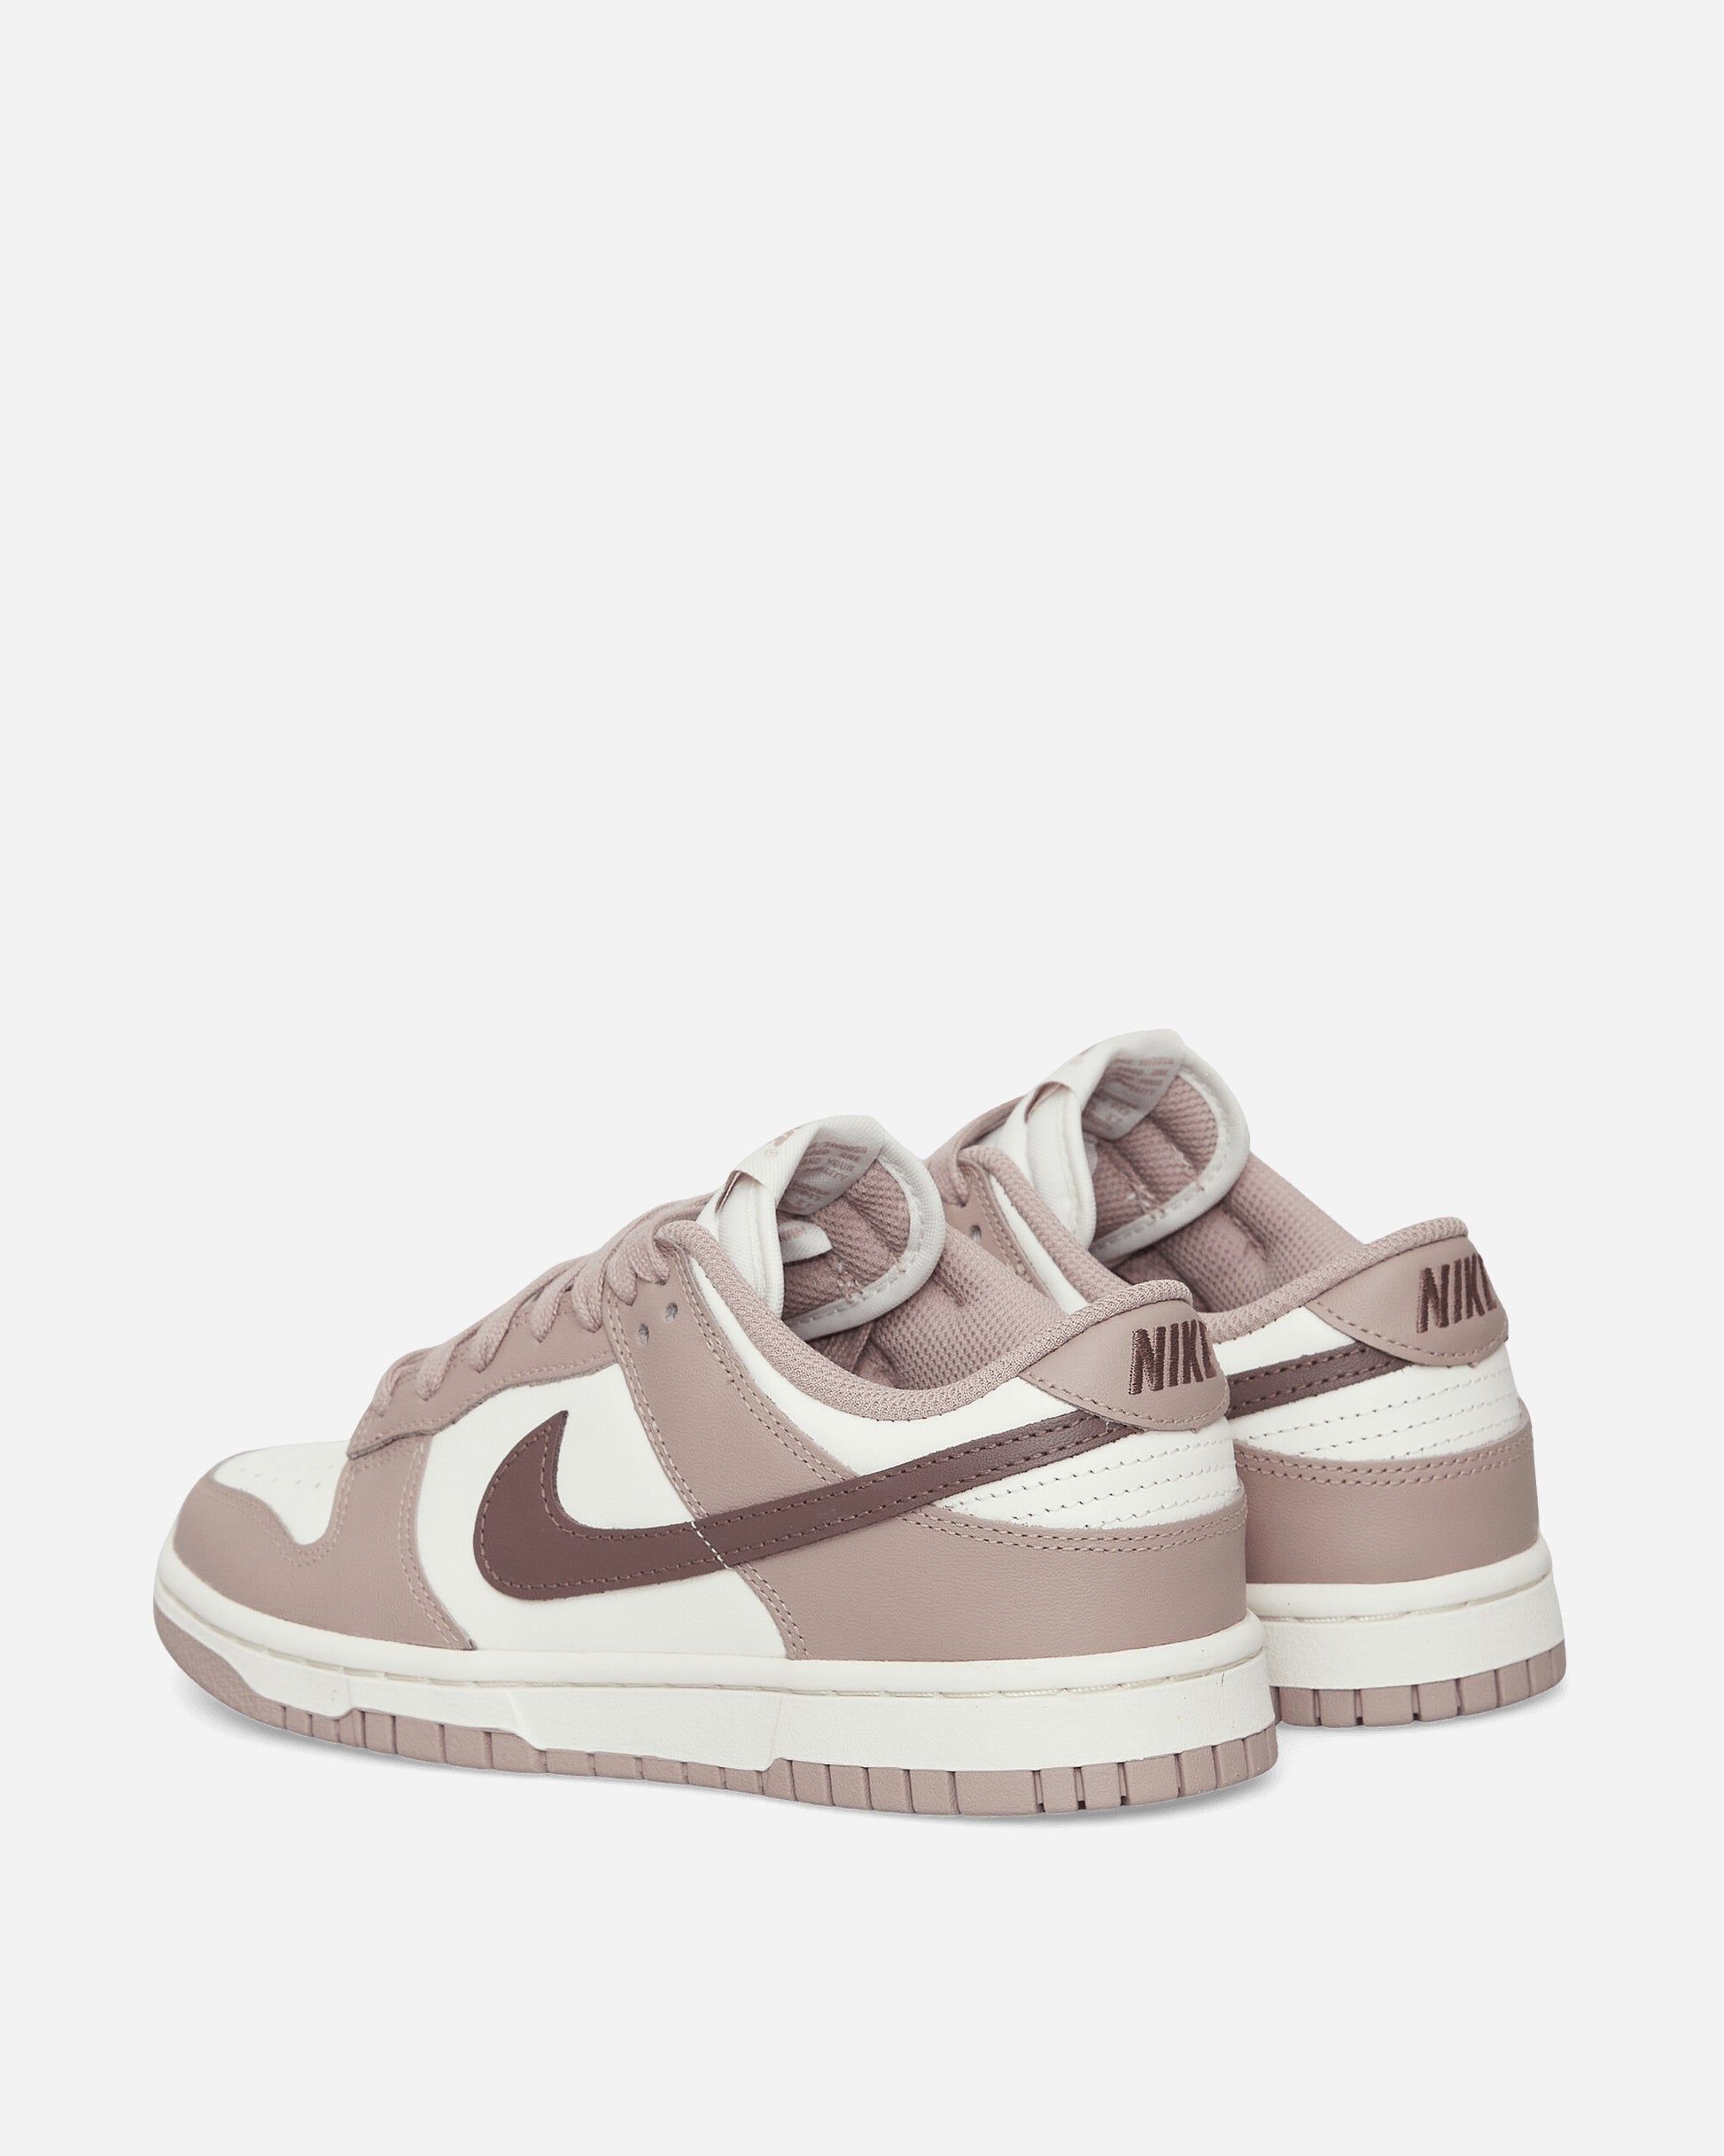 Nike Dunk Sail/Plum Eclipse Sneakers Low DD1503-125